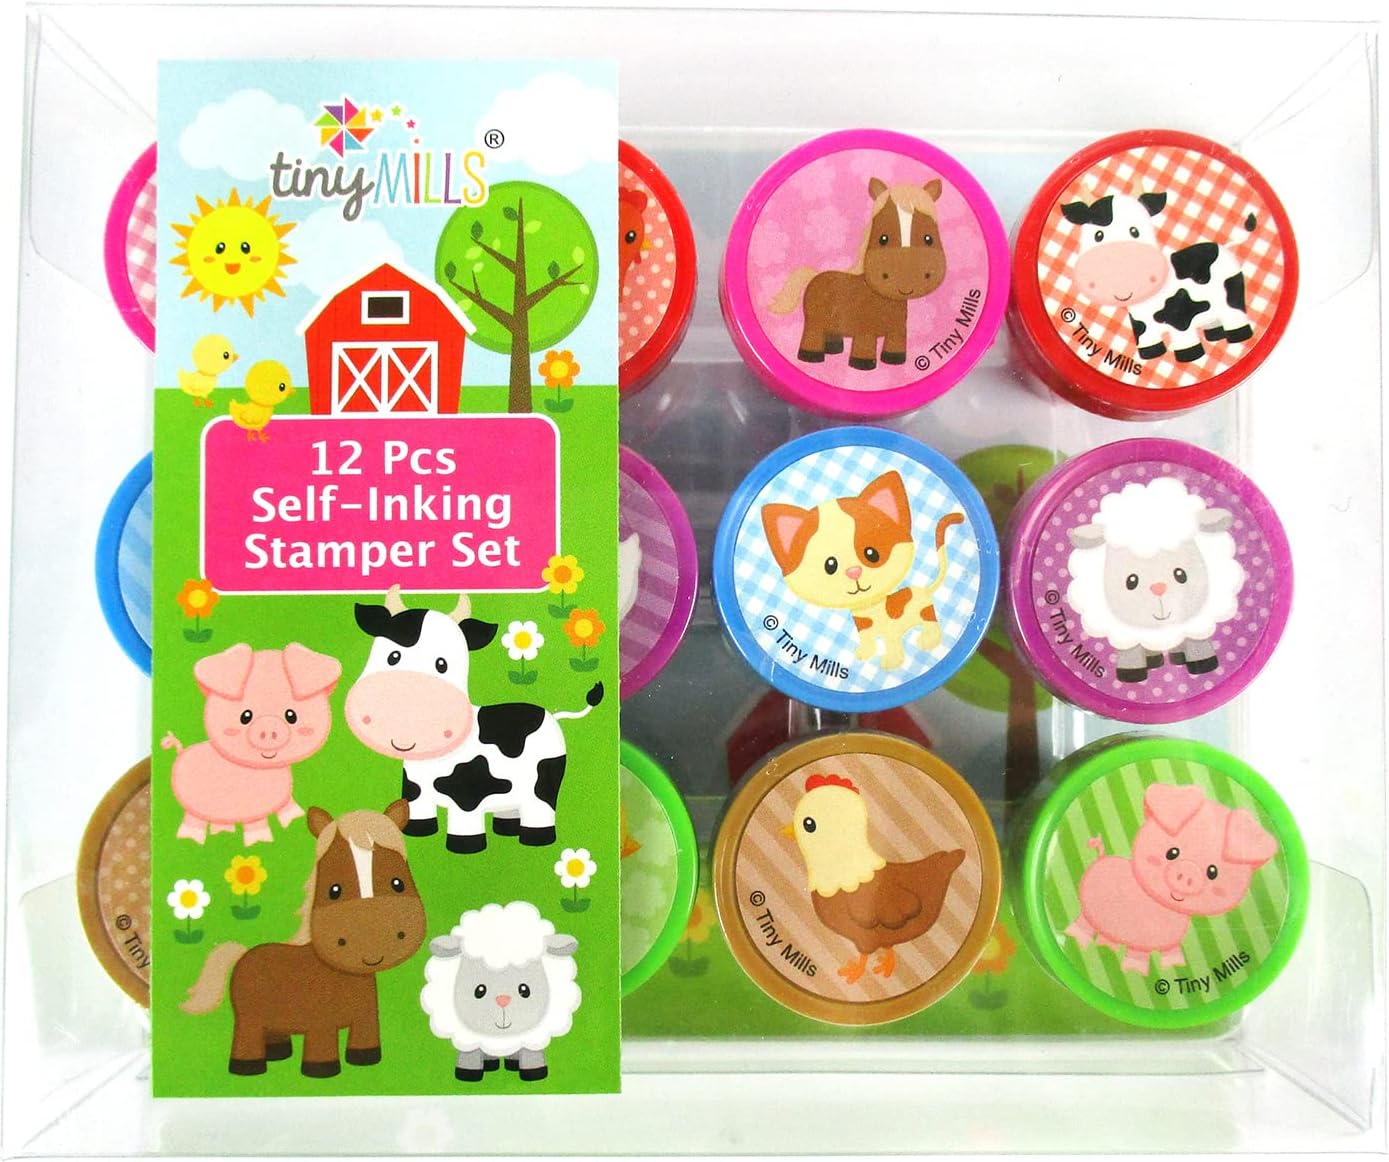 TINYMILLS 12 Pcs Farm Animals Stamp Kit for Kids - Farm Animals Barnyard Self Inking Stamps Gift Party Favors